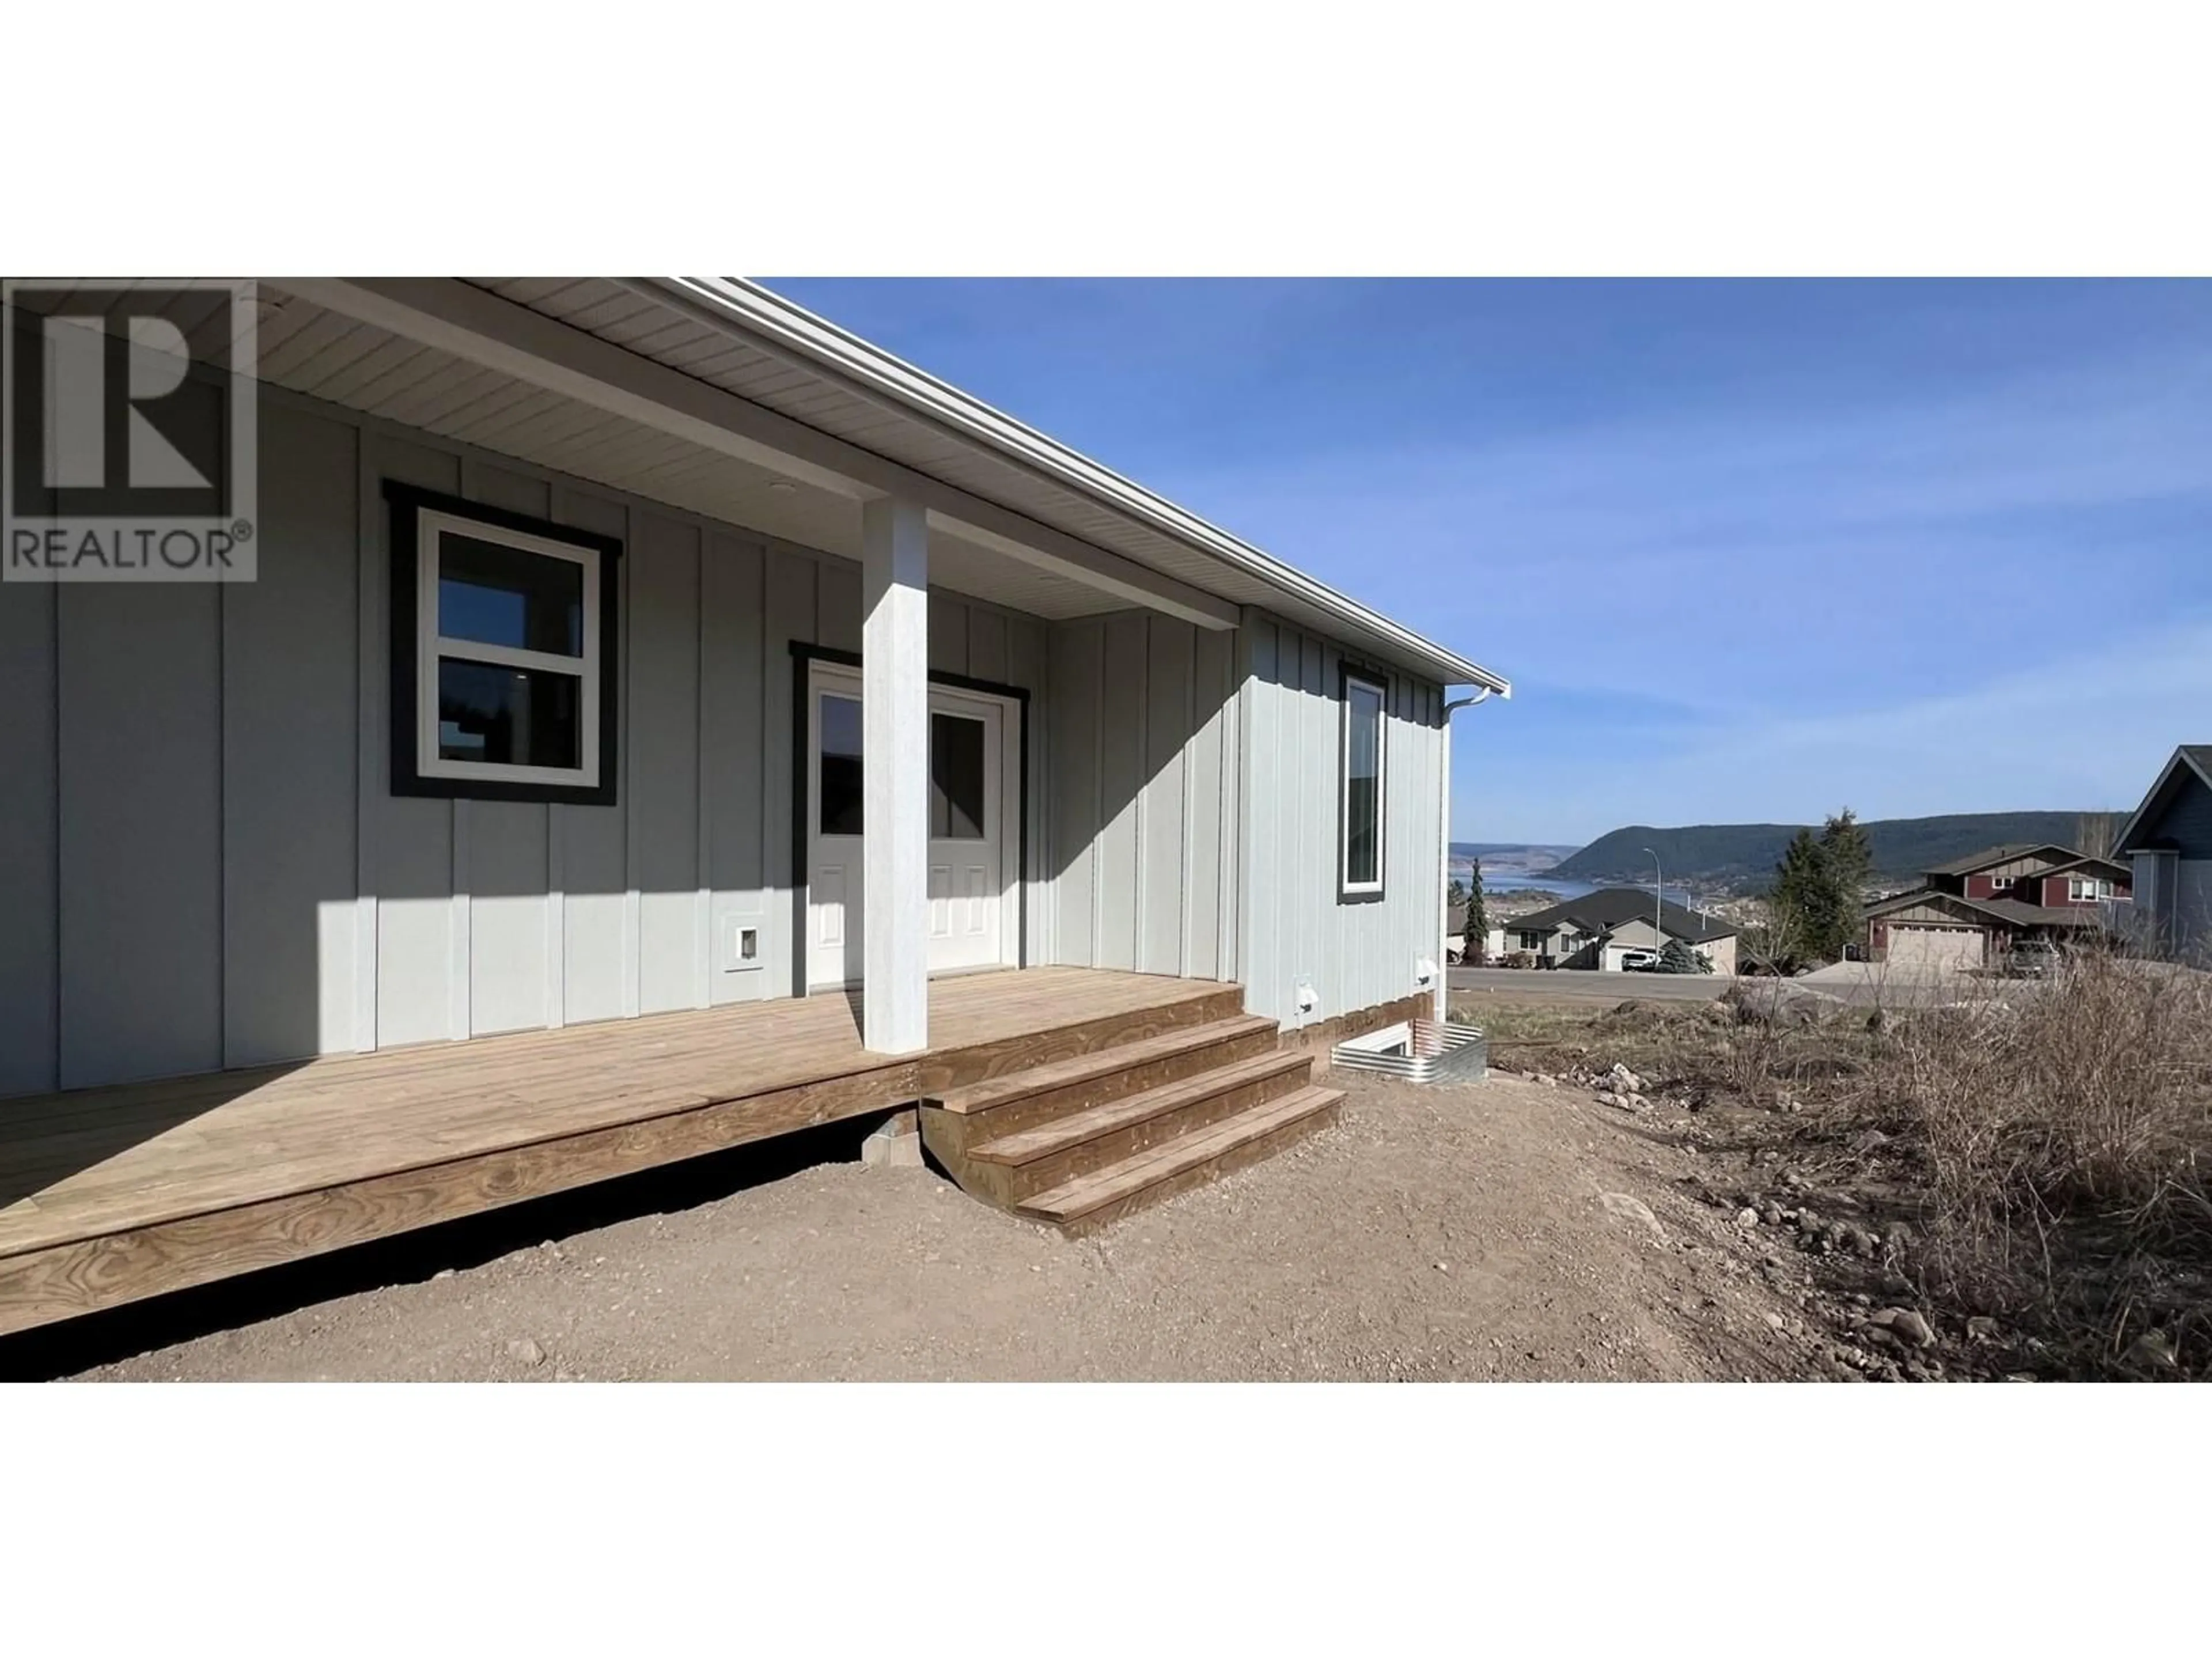 Home with vinyl exterior material for 621 BARBER STREET, Williams Lake British Columbia V2G5J1